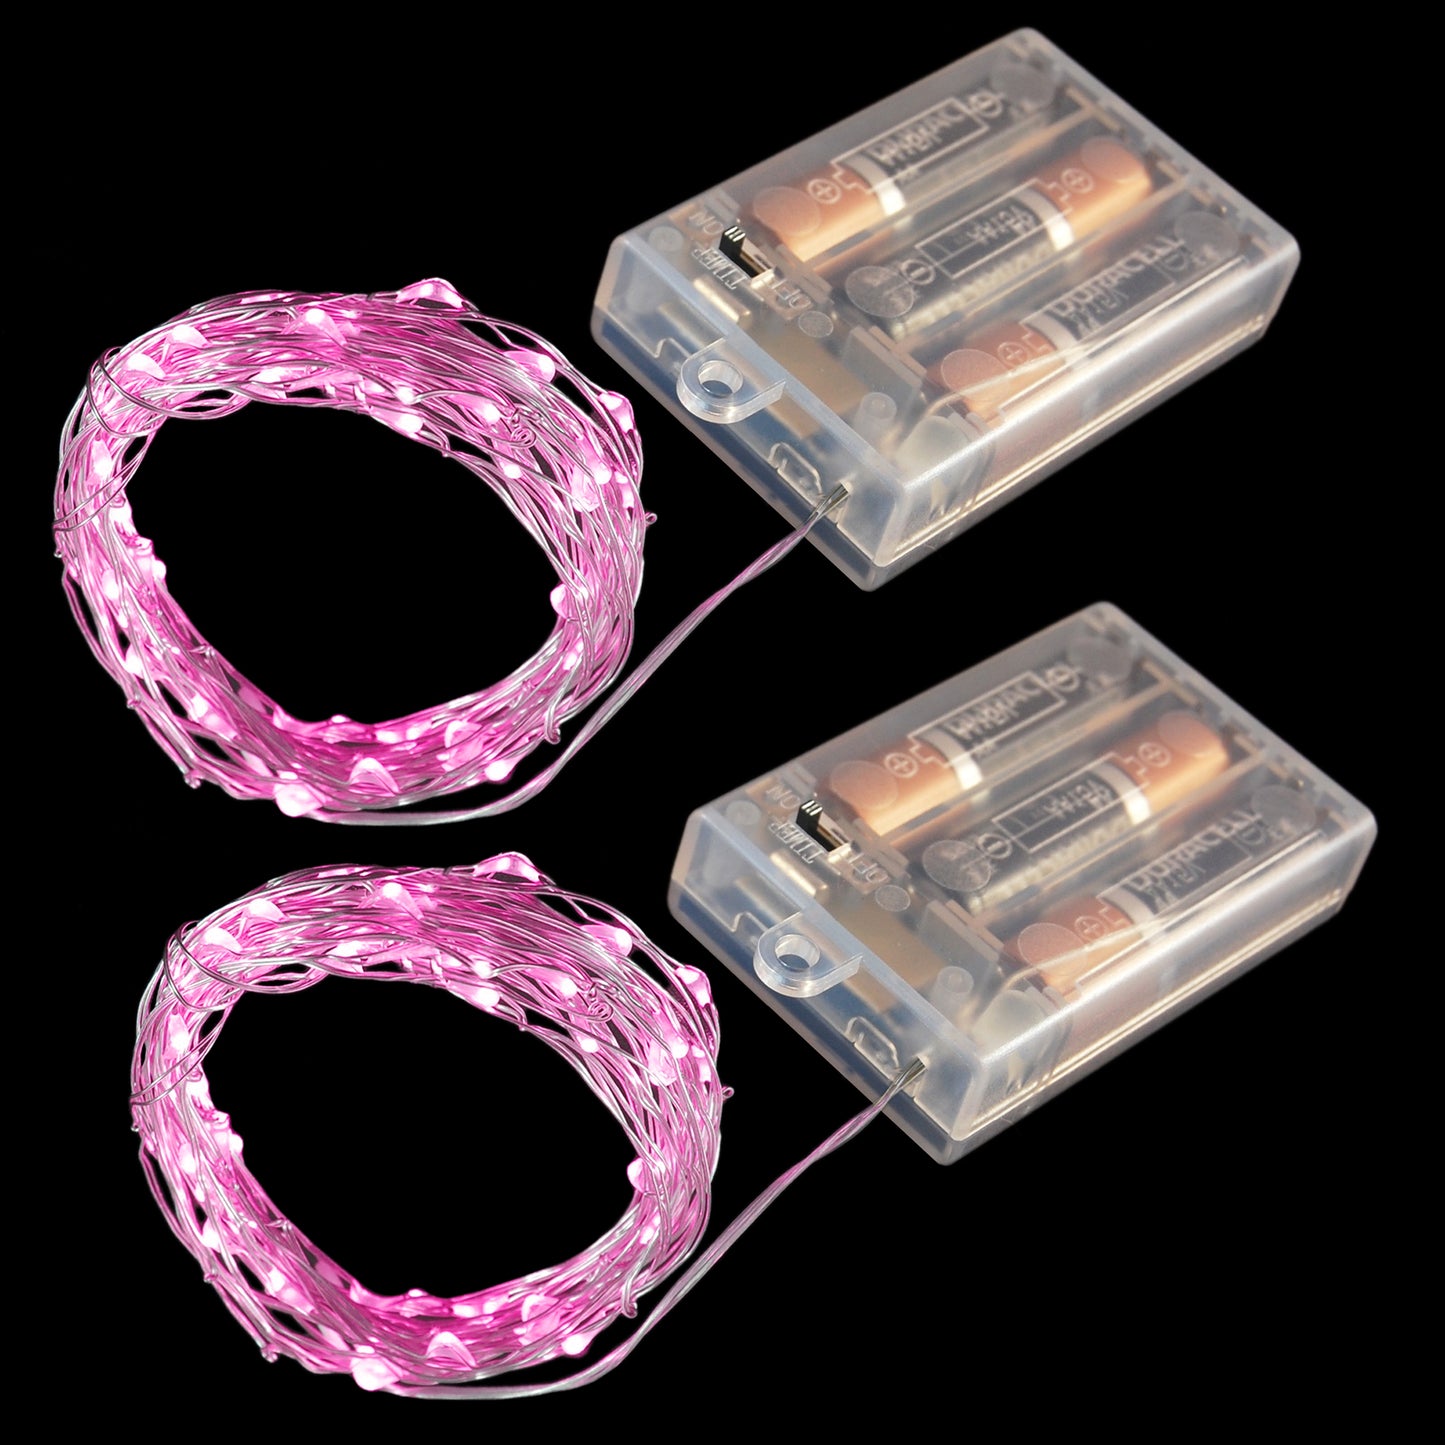 Battery Operated LED Fairy String Lights - Set of 2 - Pink